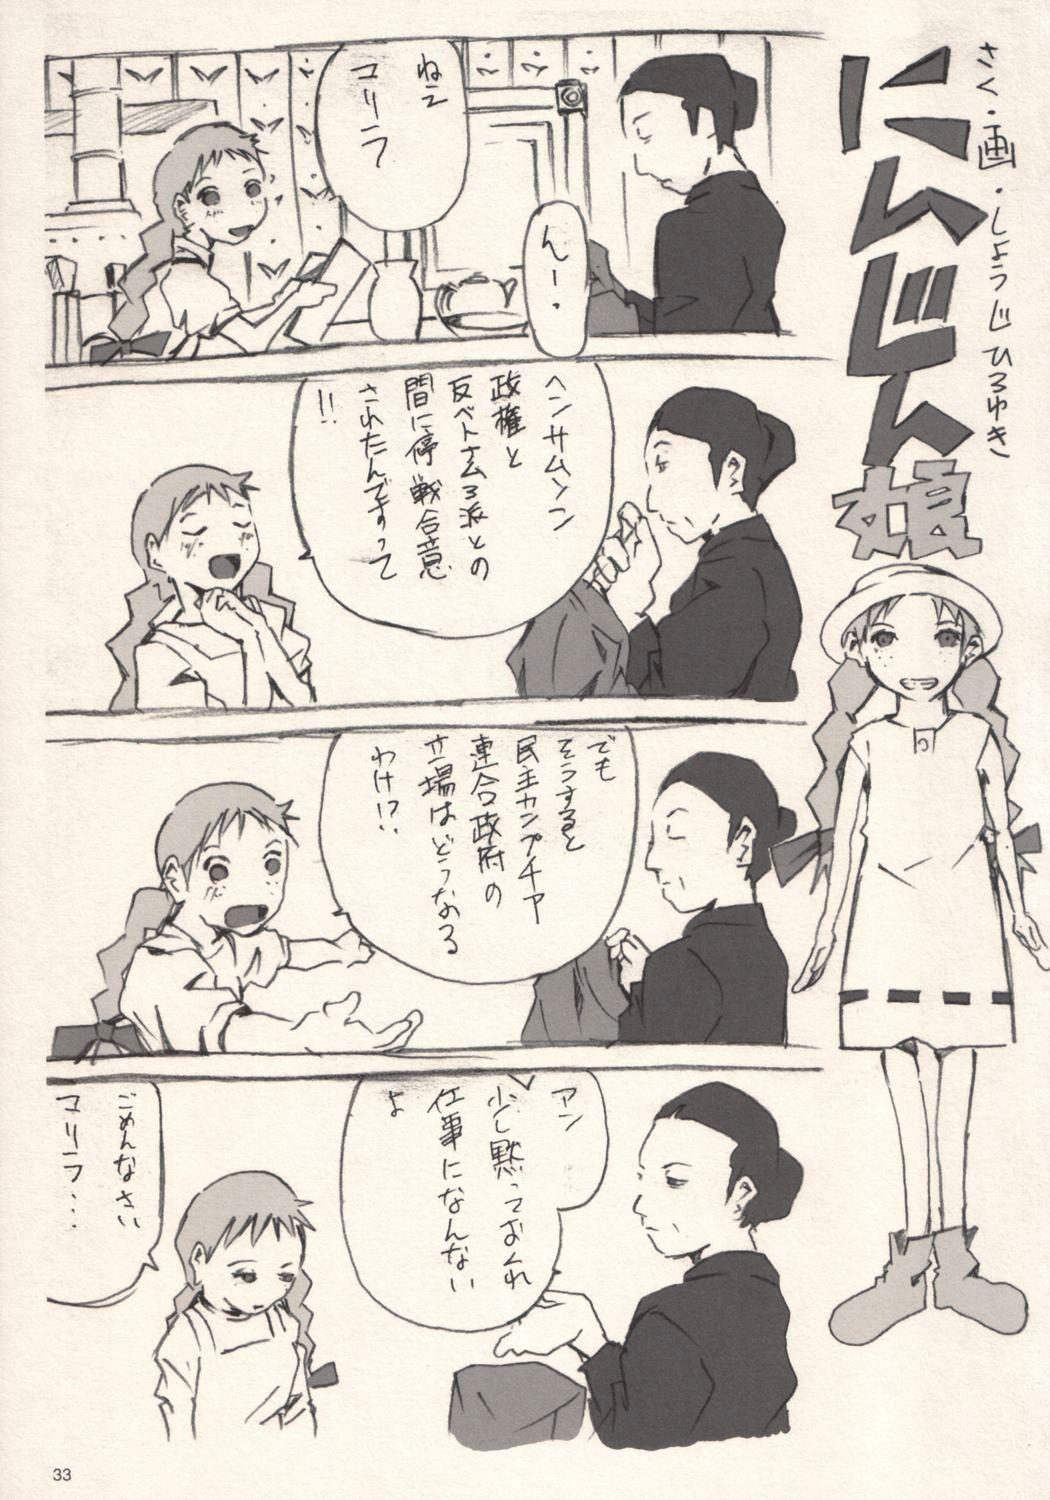 Car cherry - World masterpiece theater Anne of green gables | akage no anne Negro - Page 33